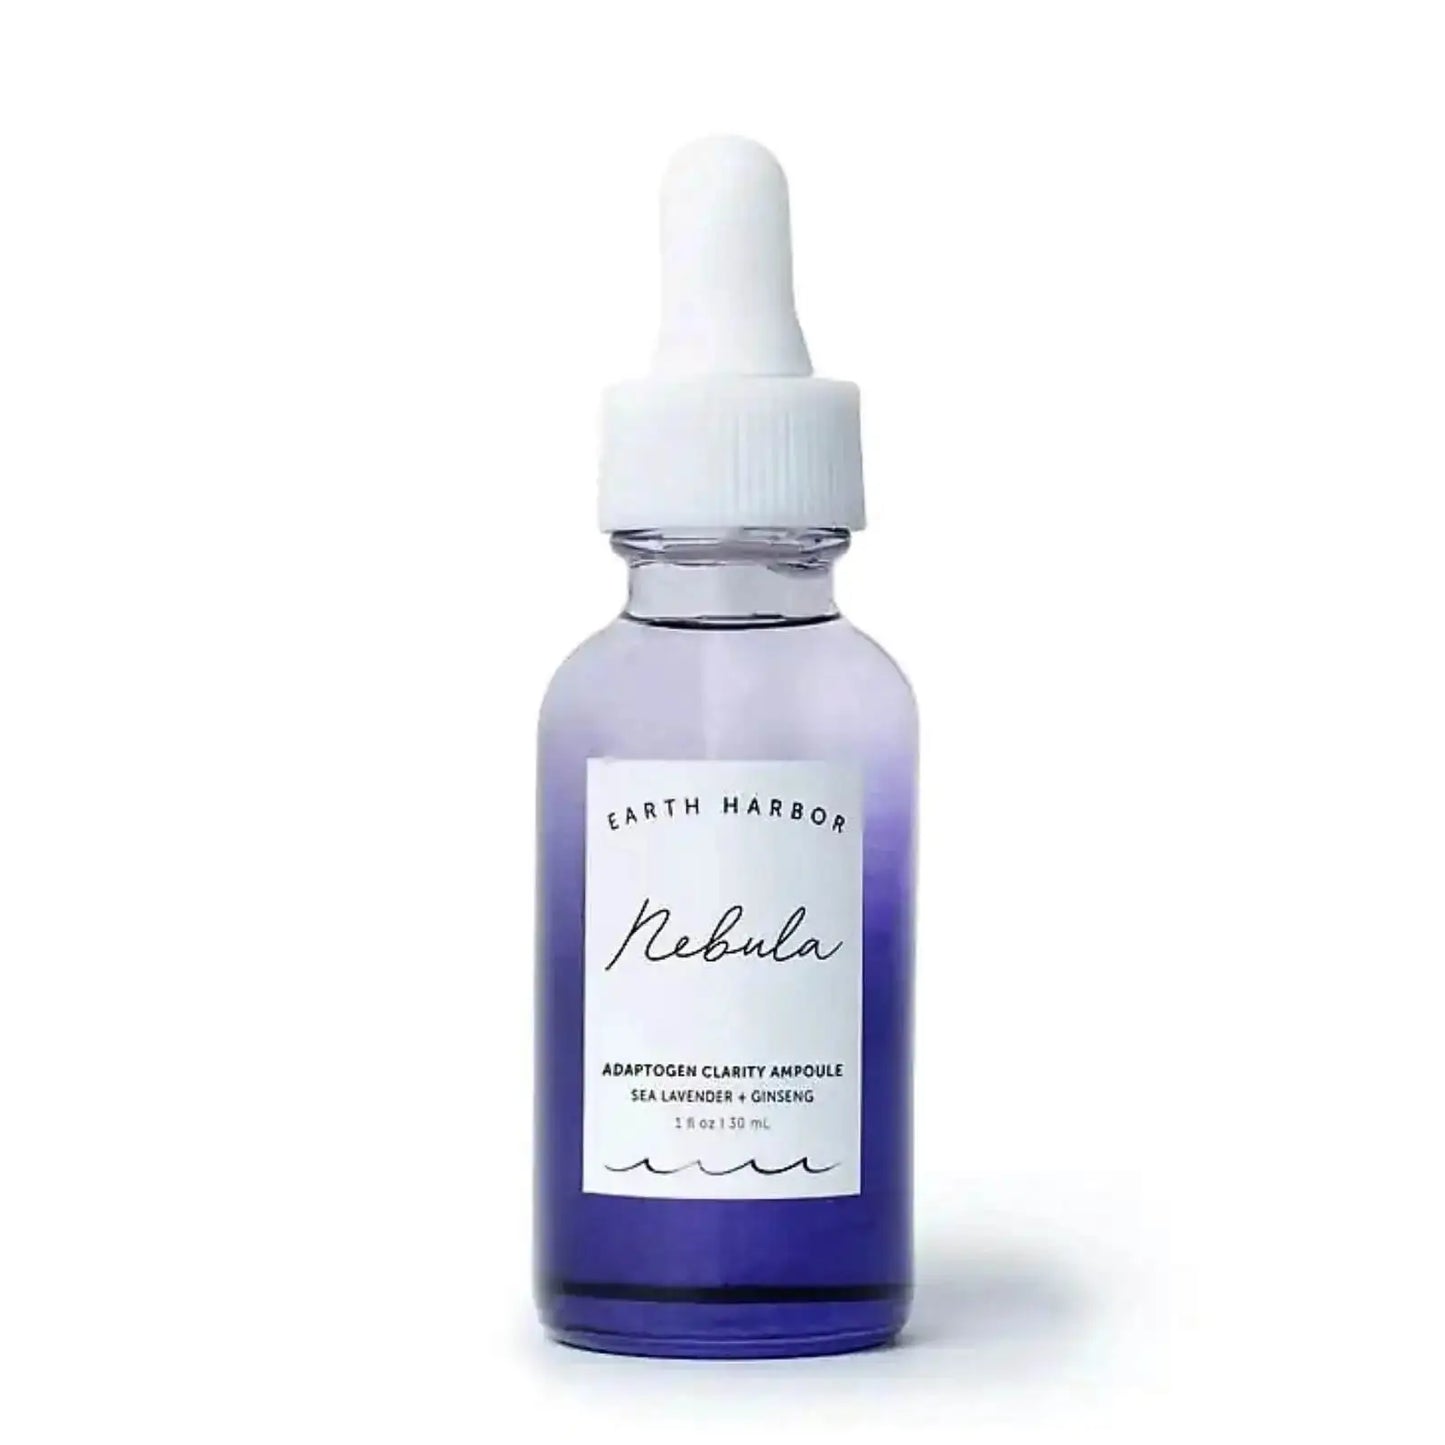 Earth Harbor Nebula - Natural Face Serum for Blemishes